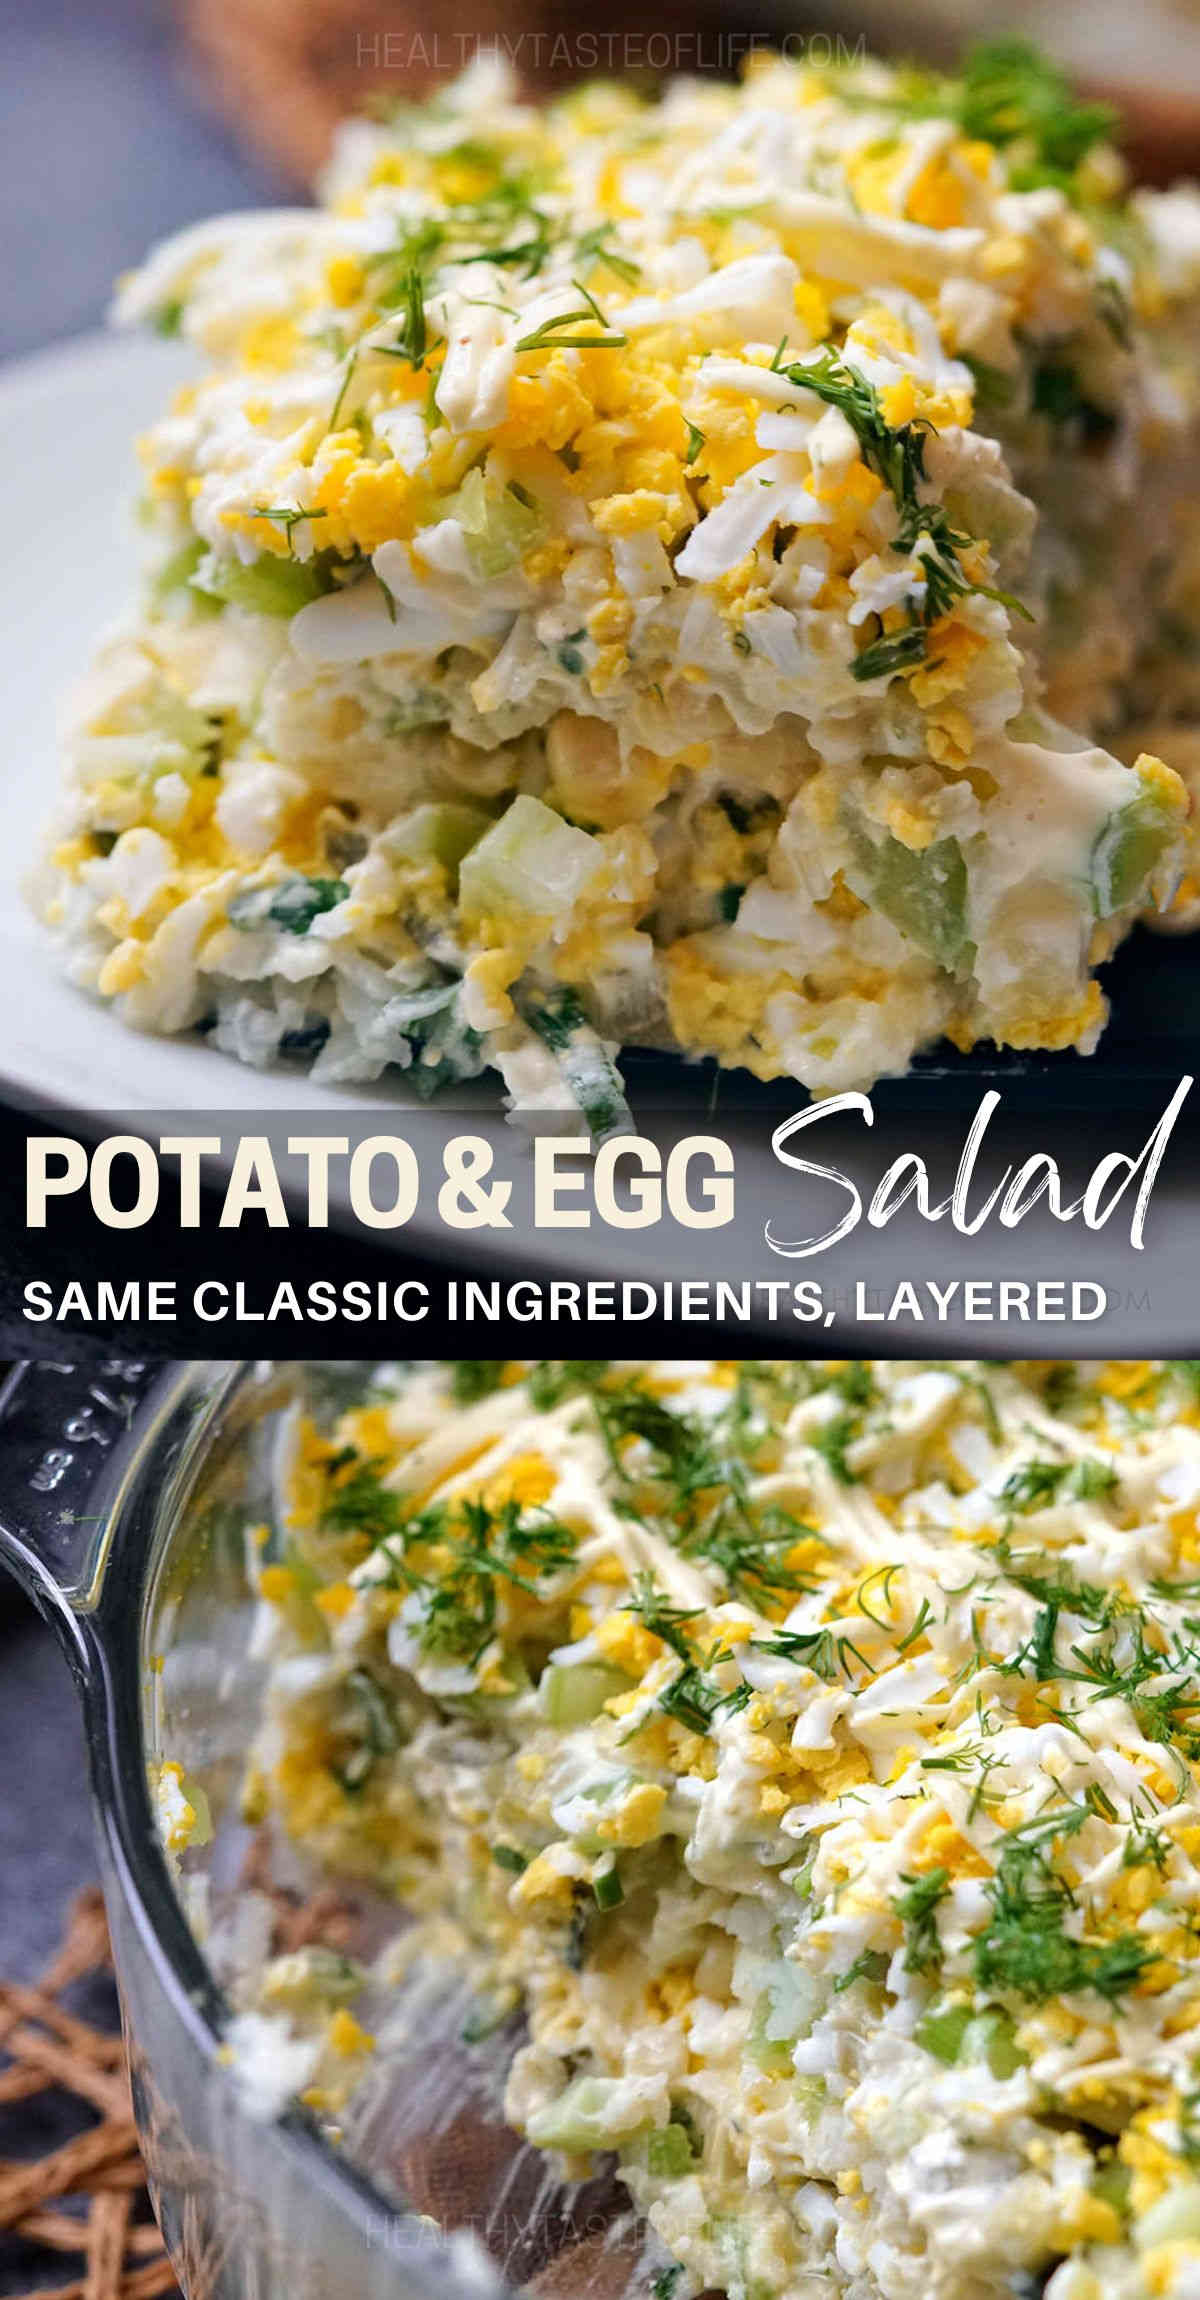 Potato and egg salad recipe with a creamy mayonnaise-based dressing. This simple potato & egg salad is made with potatoes, hard-boiled eggs, dill pickles, celery, green onions, homemade mayonnaise - assembled in layers and finished with chopped dill. The recipe has the ingredients of a classic potato salad with egg - a perfect side dish for any special occasion (great for Christmas or Easter). Serve chilled. #potatosalad #eggsalad #potatoeggsalad #recipe #easter #sidedish